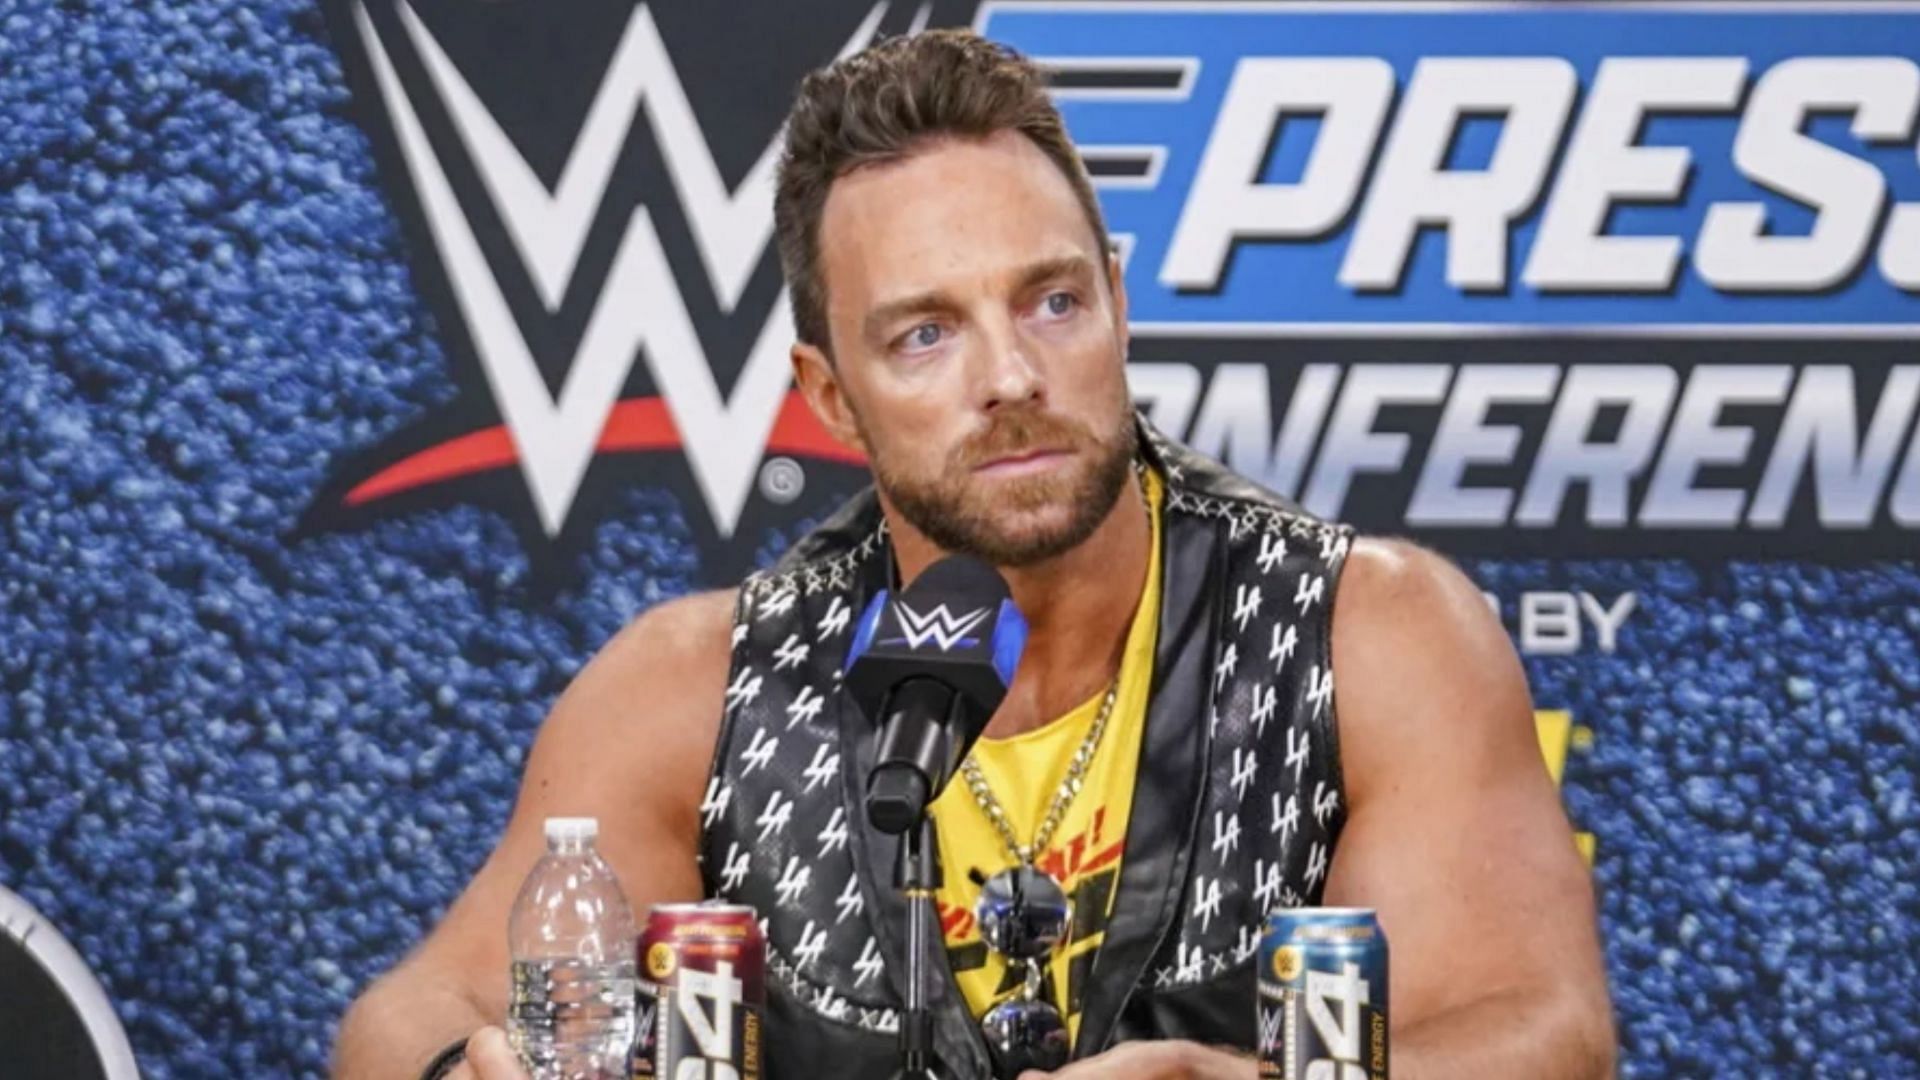 LA Knight is currently feuding with The Miz in WWE